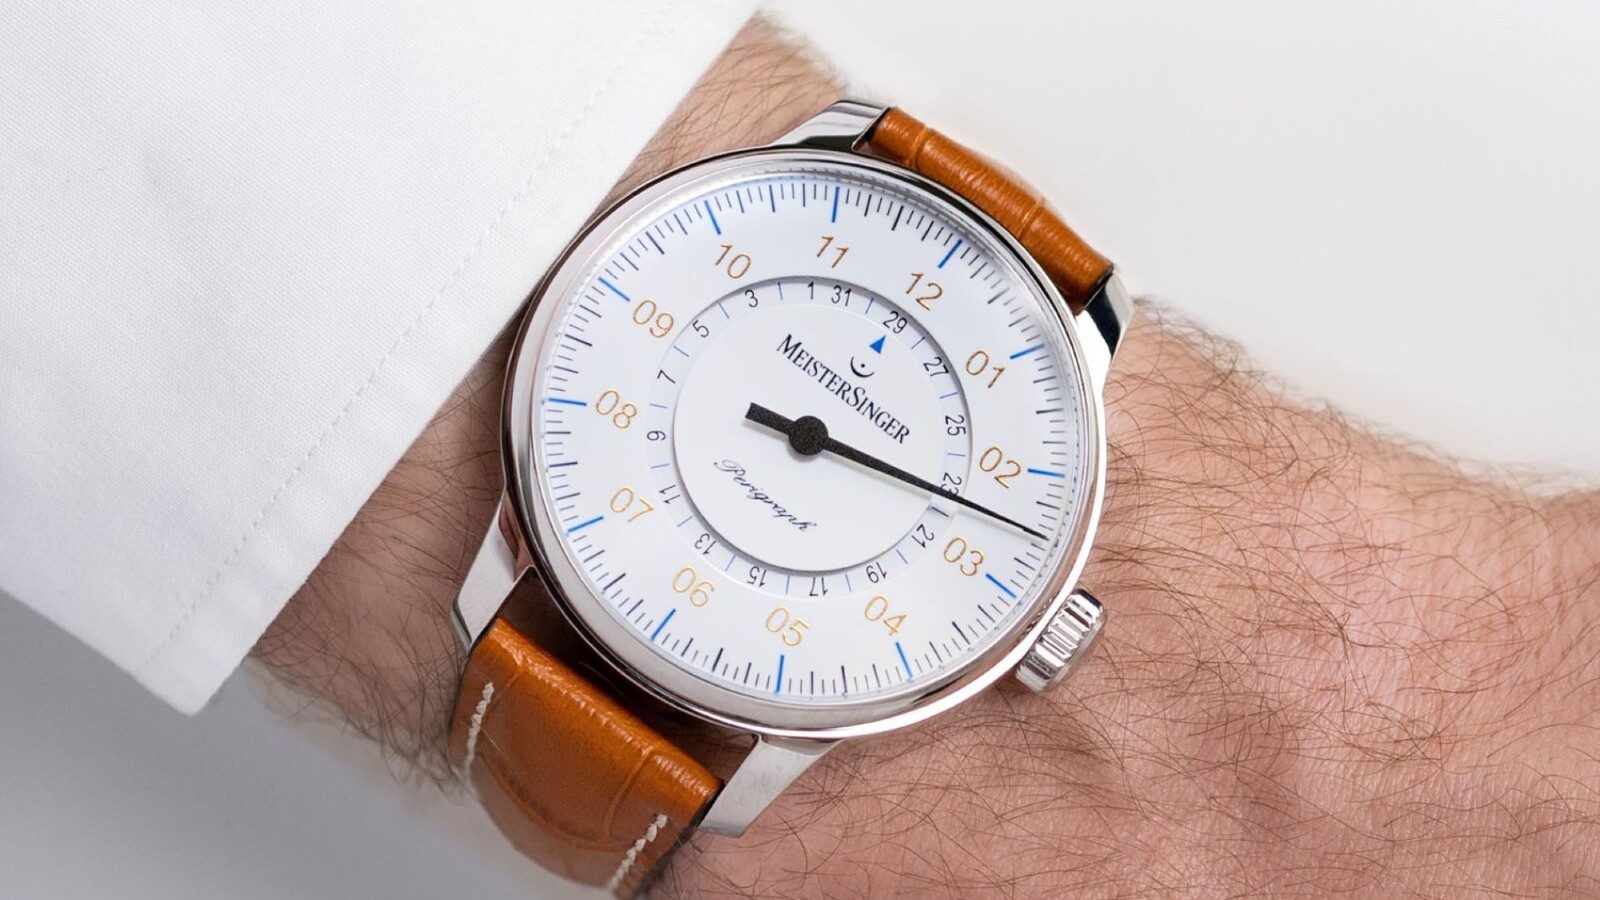 Glowing Watch Stock Photos and Pictures - 7,380 Images | Shutterstock